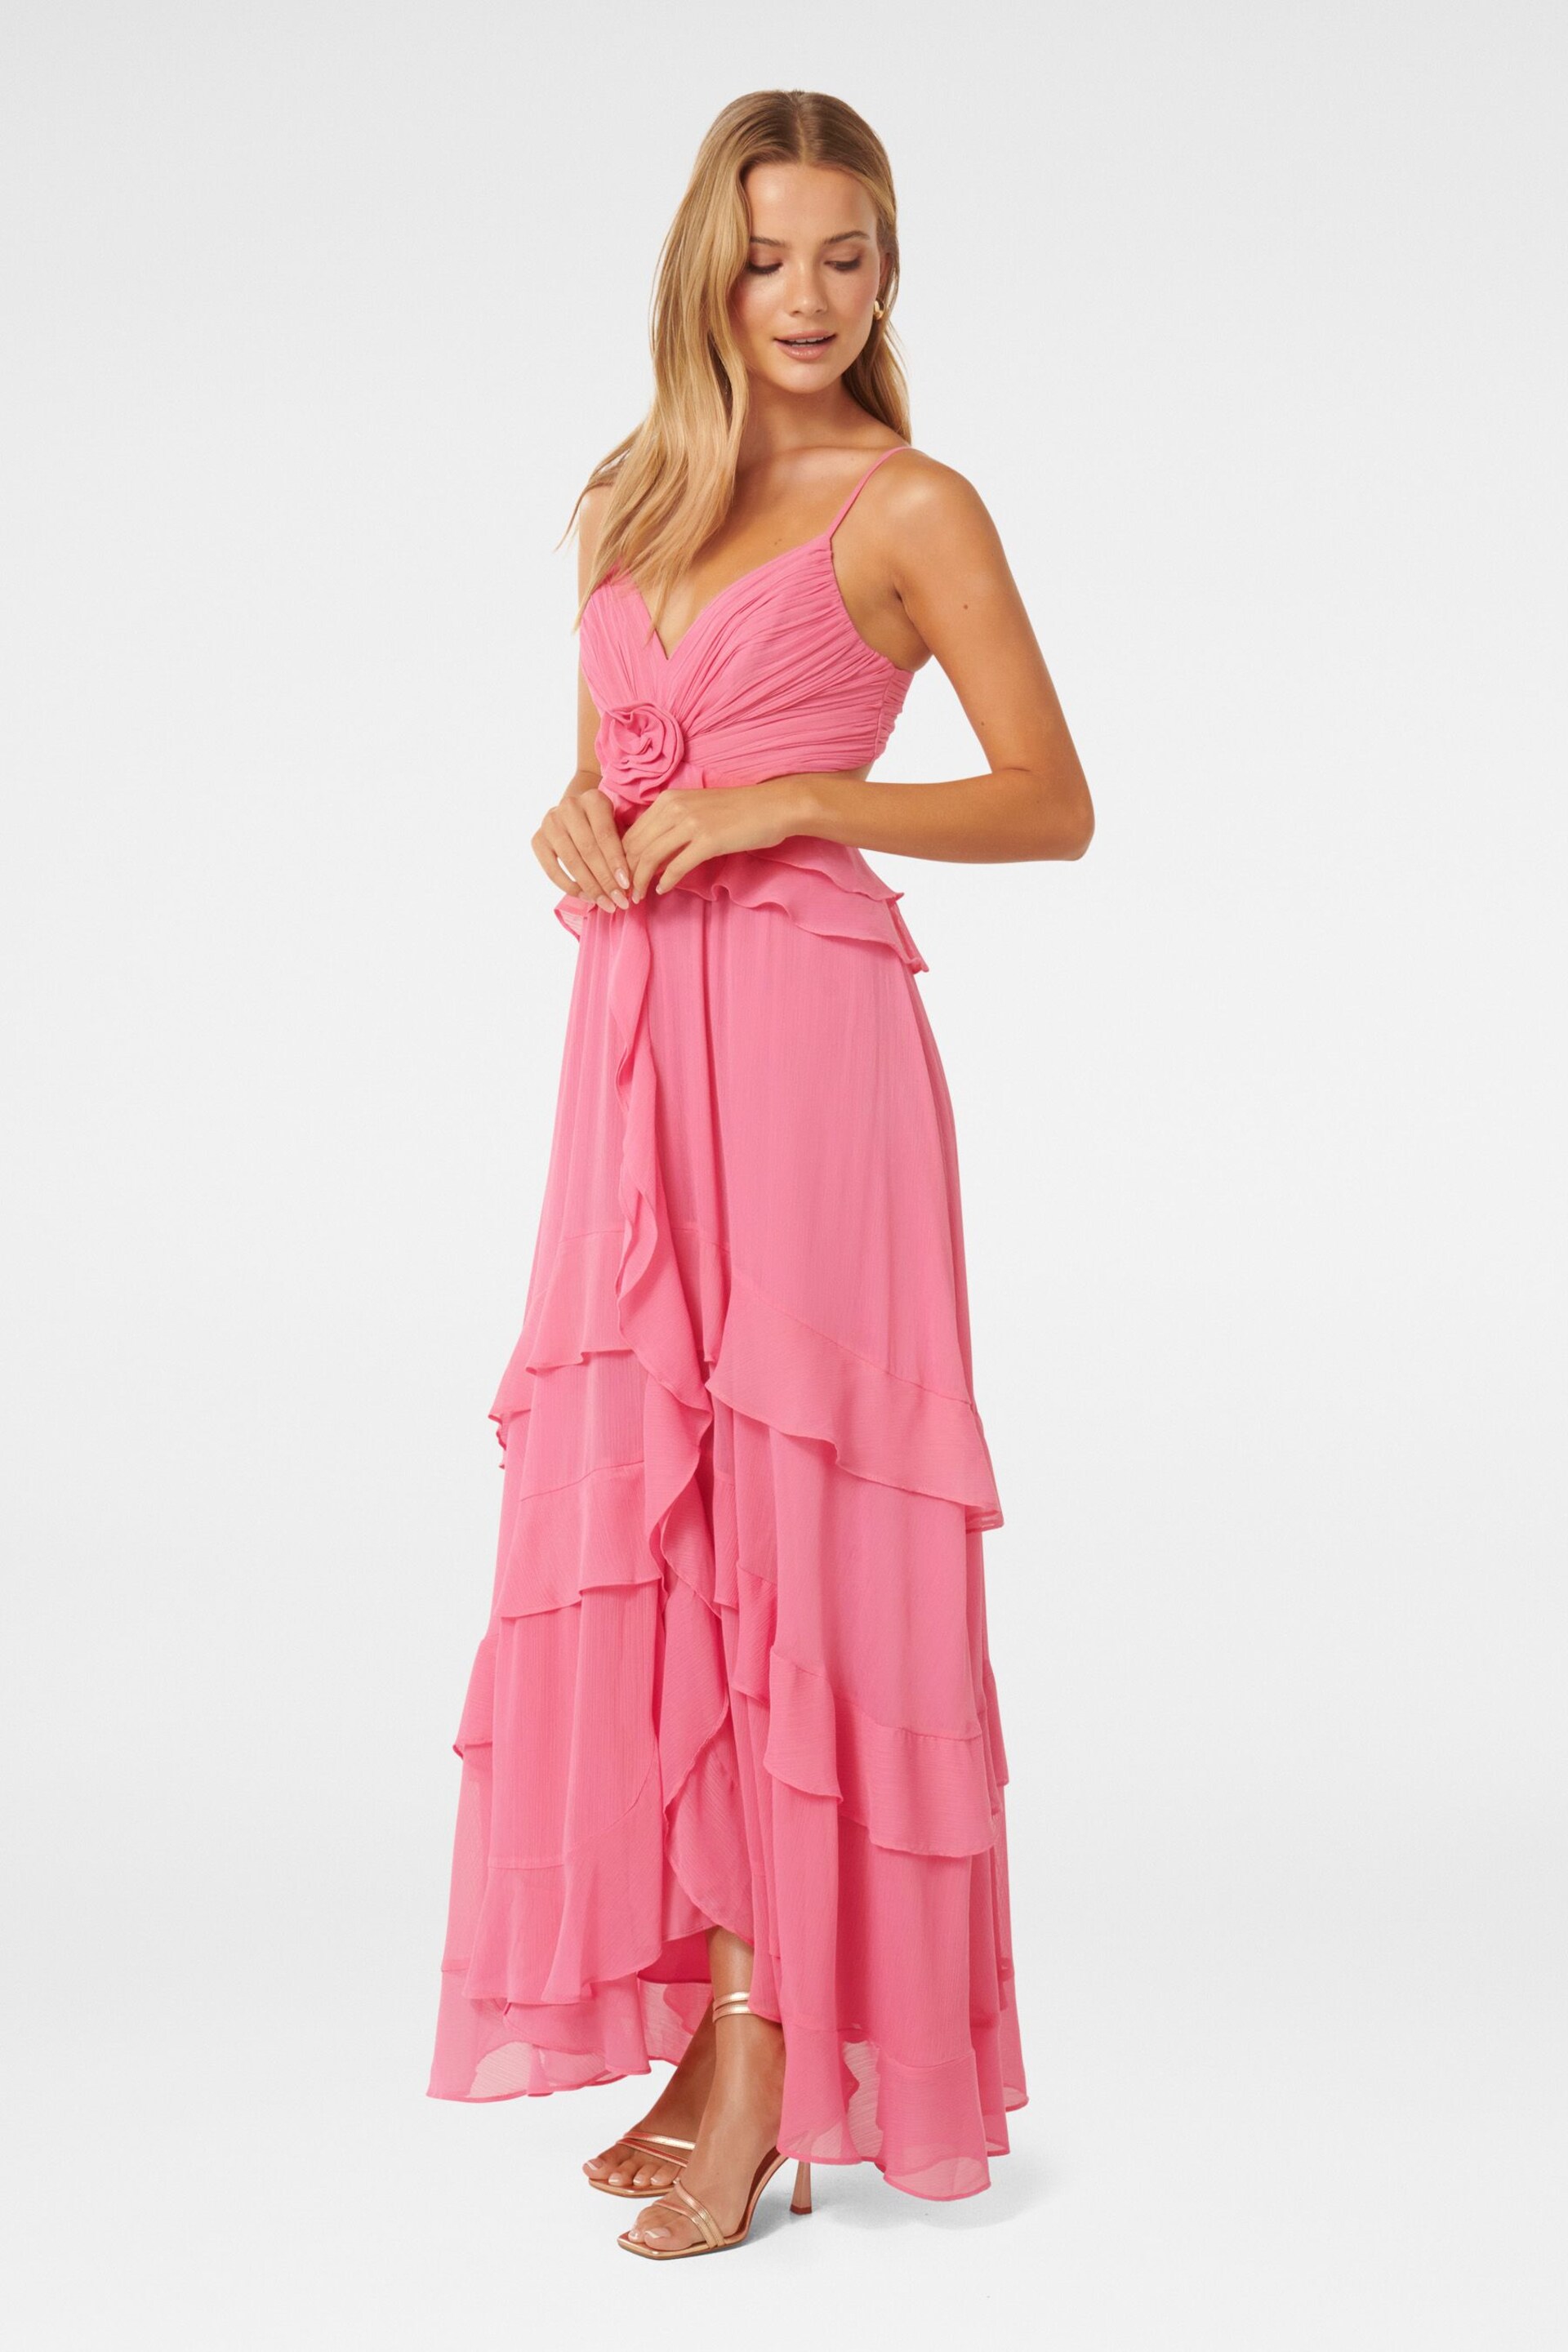 Forever New Pink Harper Ruffle Maxi Dress - Image 2 of 3